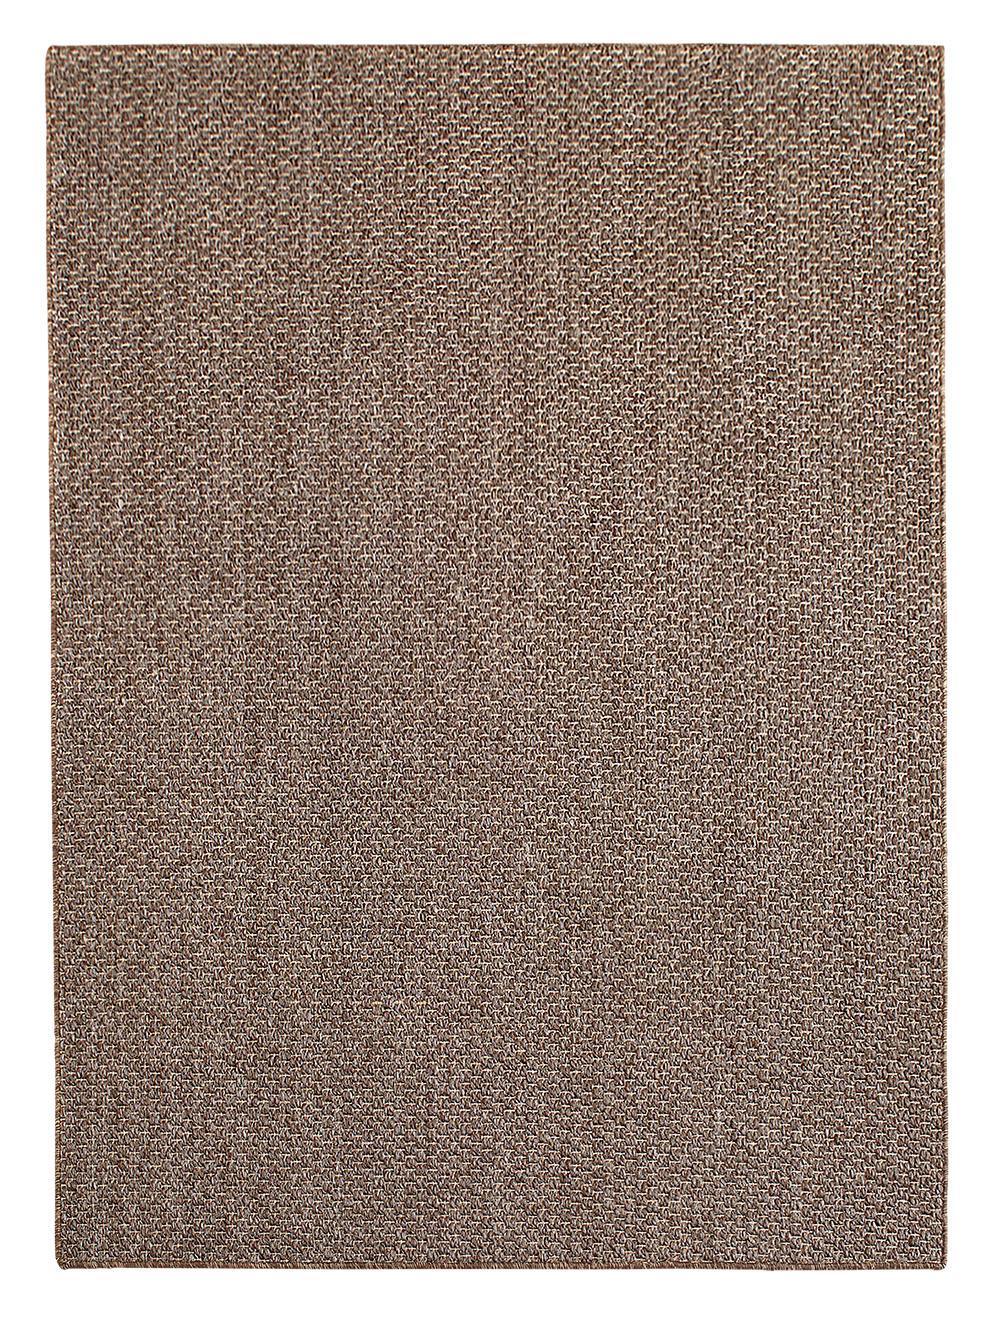 Taupe Belize Carpet by Massimo Copenhagen.
Materials: 100% Sisal.
Dimensions: W 300 x H 400 cm.
Available colors: Taupe and Natural.
Other dimensions are available: 80x150 cm, 90x200 cm, 90x300 cm, 160x240 cm, 240x320 cm, 300x400 cm (not